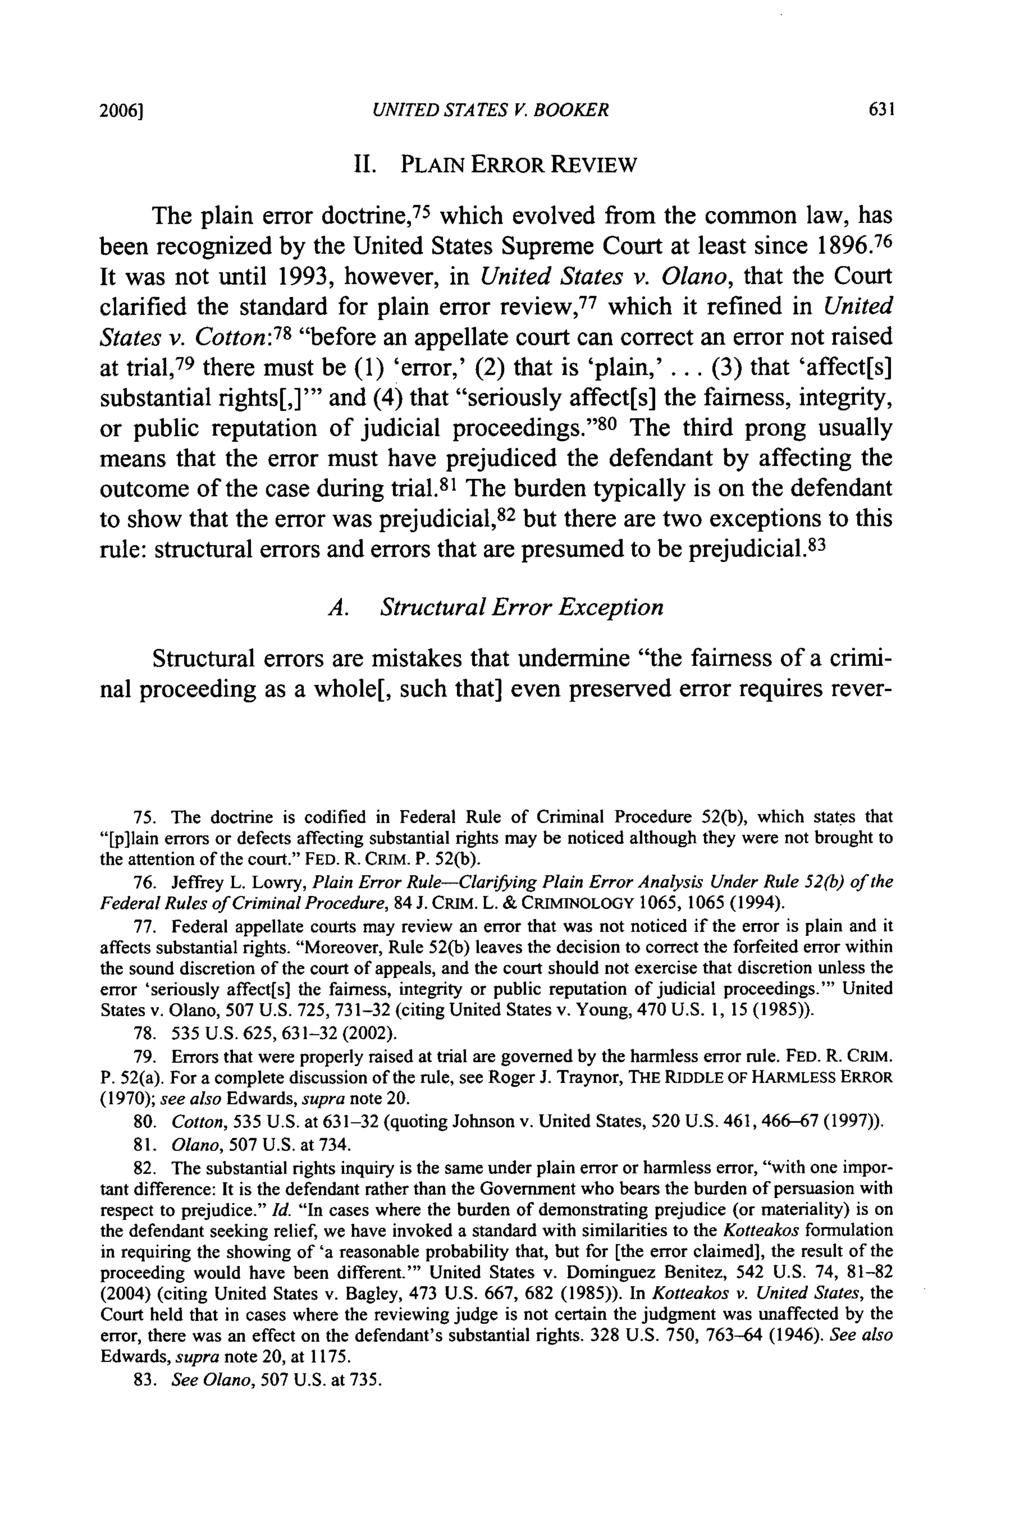 2006] UNITED STATES V. BOOKER II. PLAIN ERROR REVIEW The plain error doctrine, 75 which evolved from the common law, has been recognized by the United States Supreme Court at least since 1896.